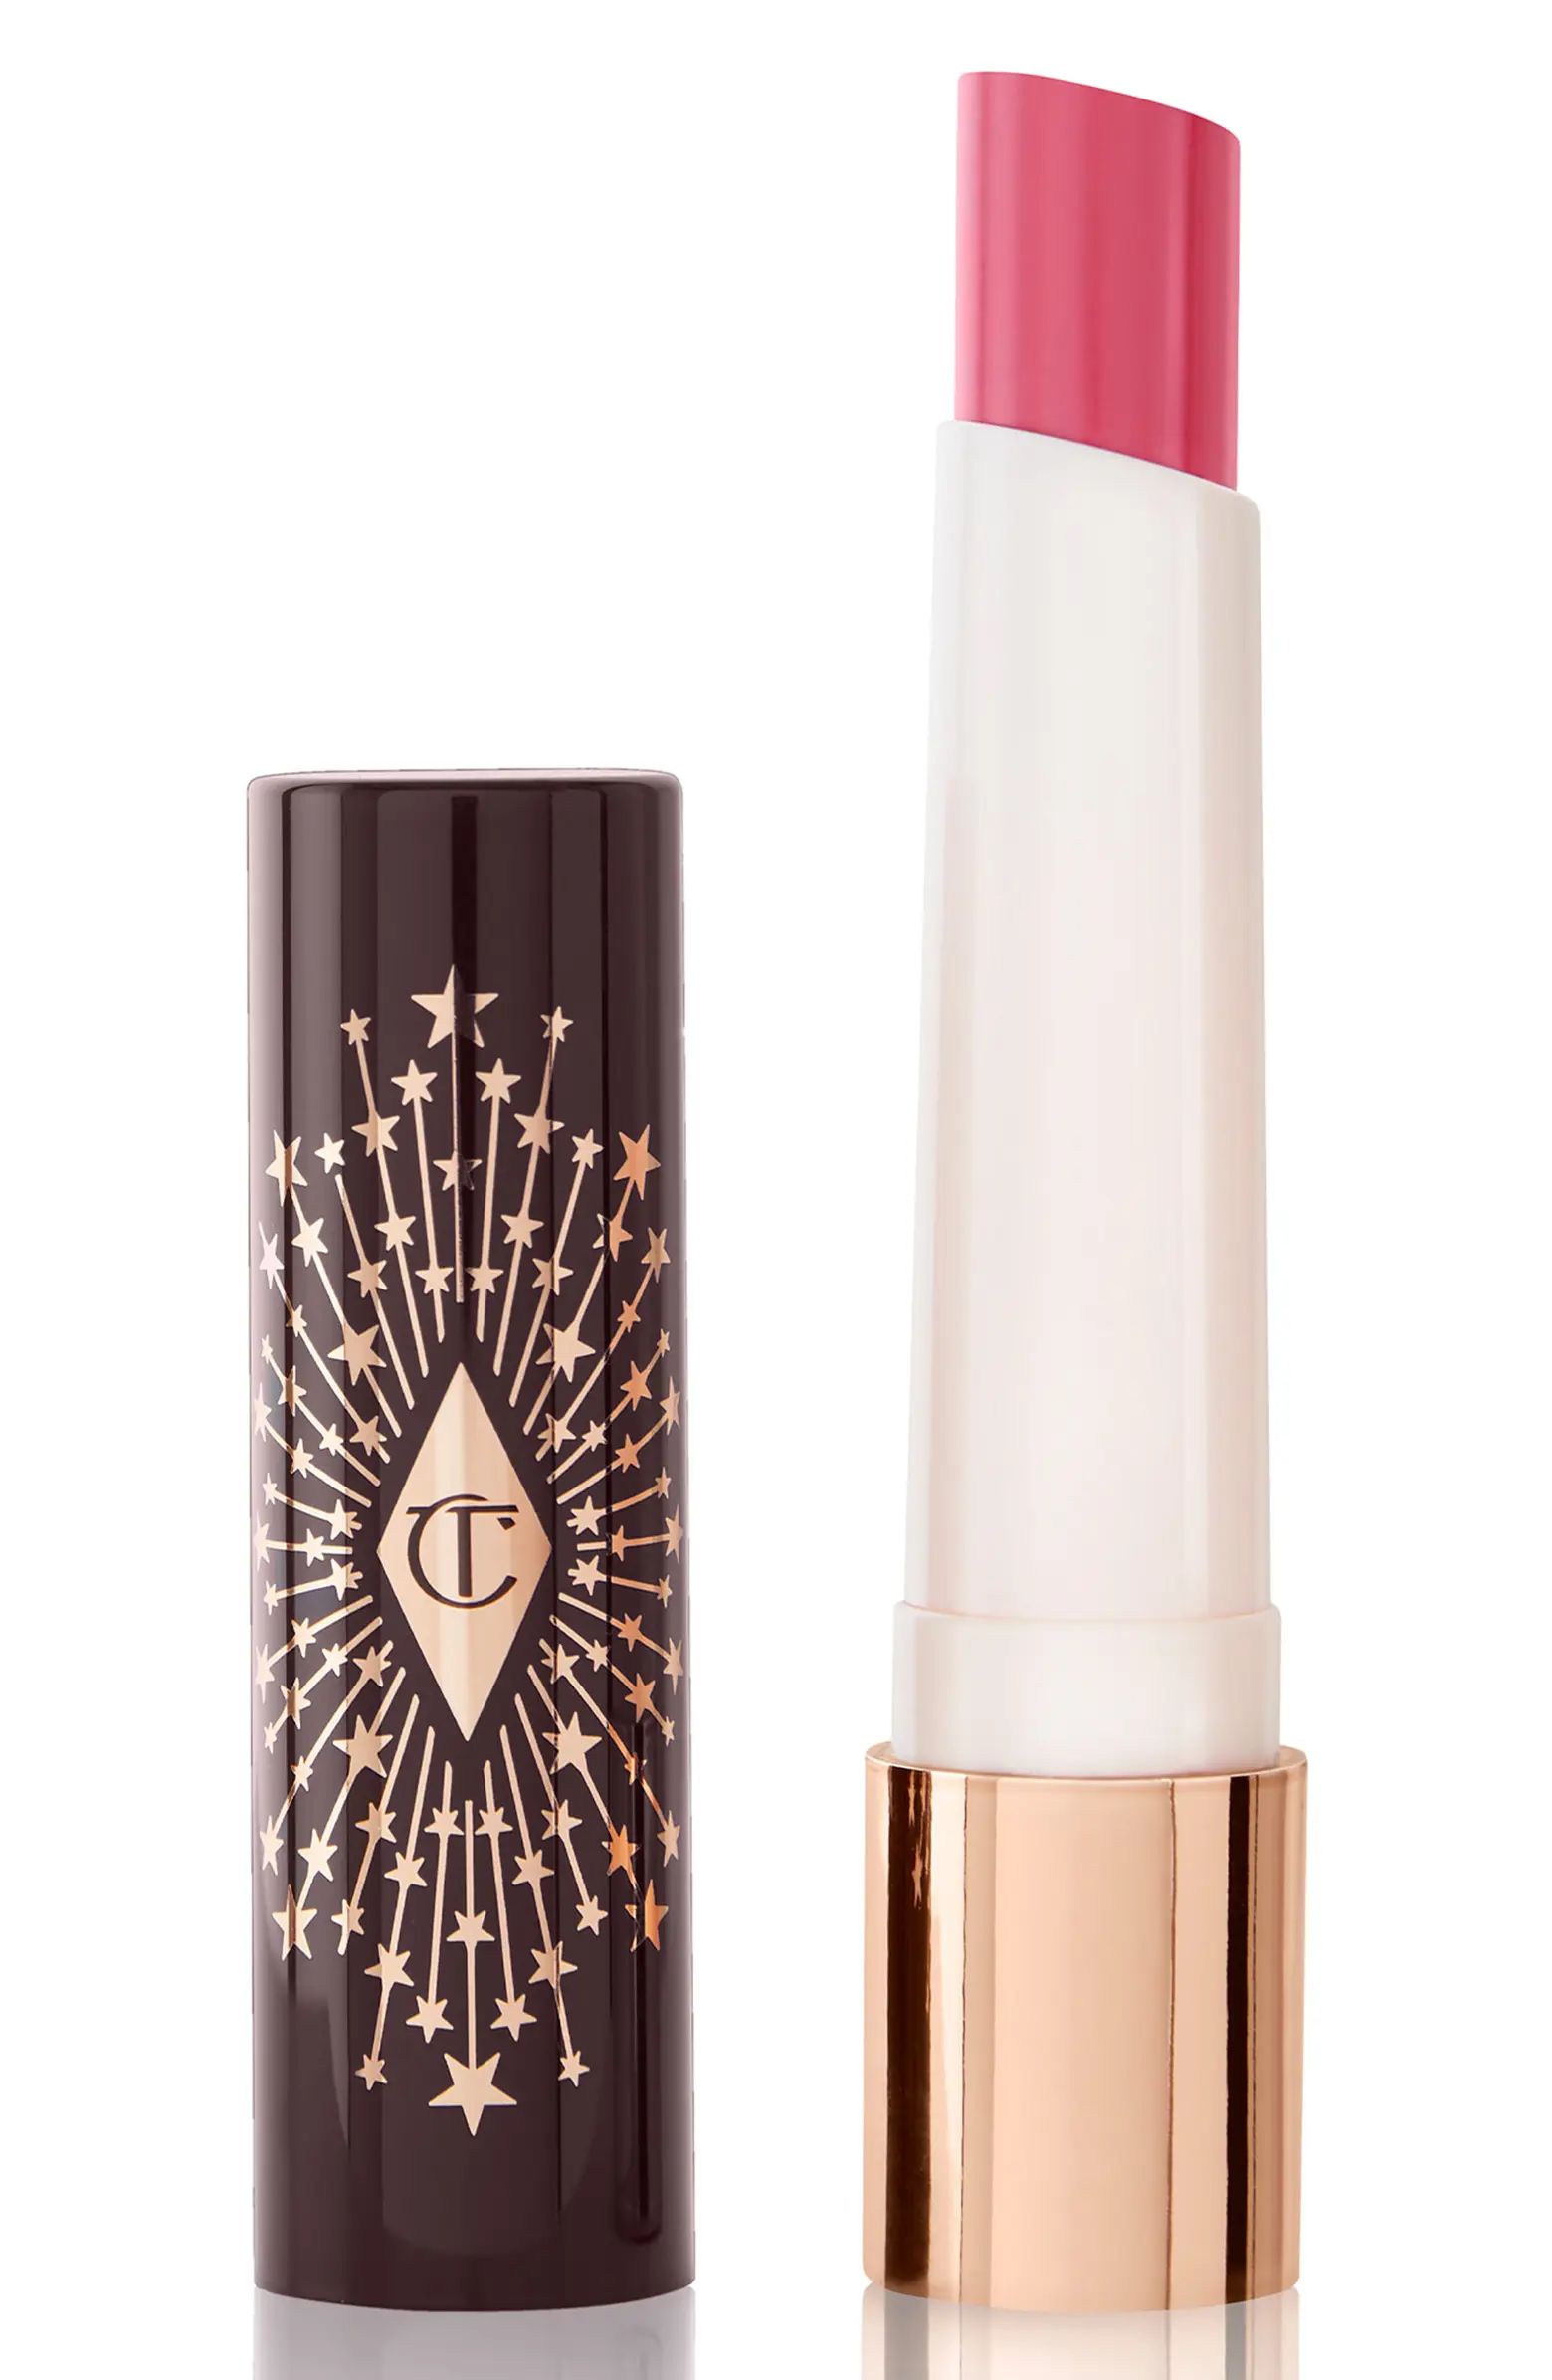 Hyaluronic Happikiss Lipstick Balm | Nordstrom